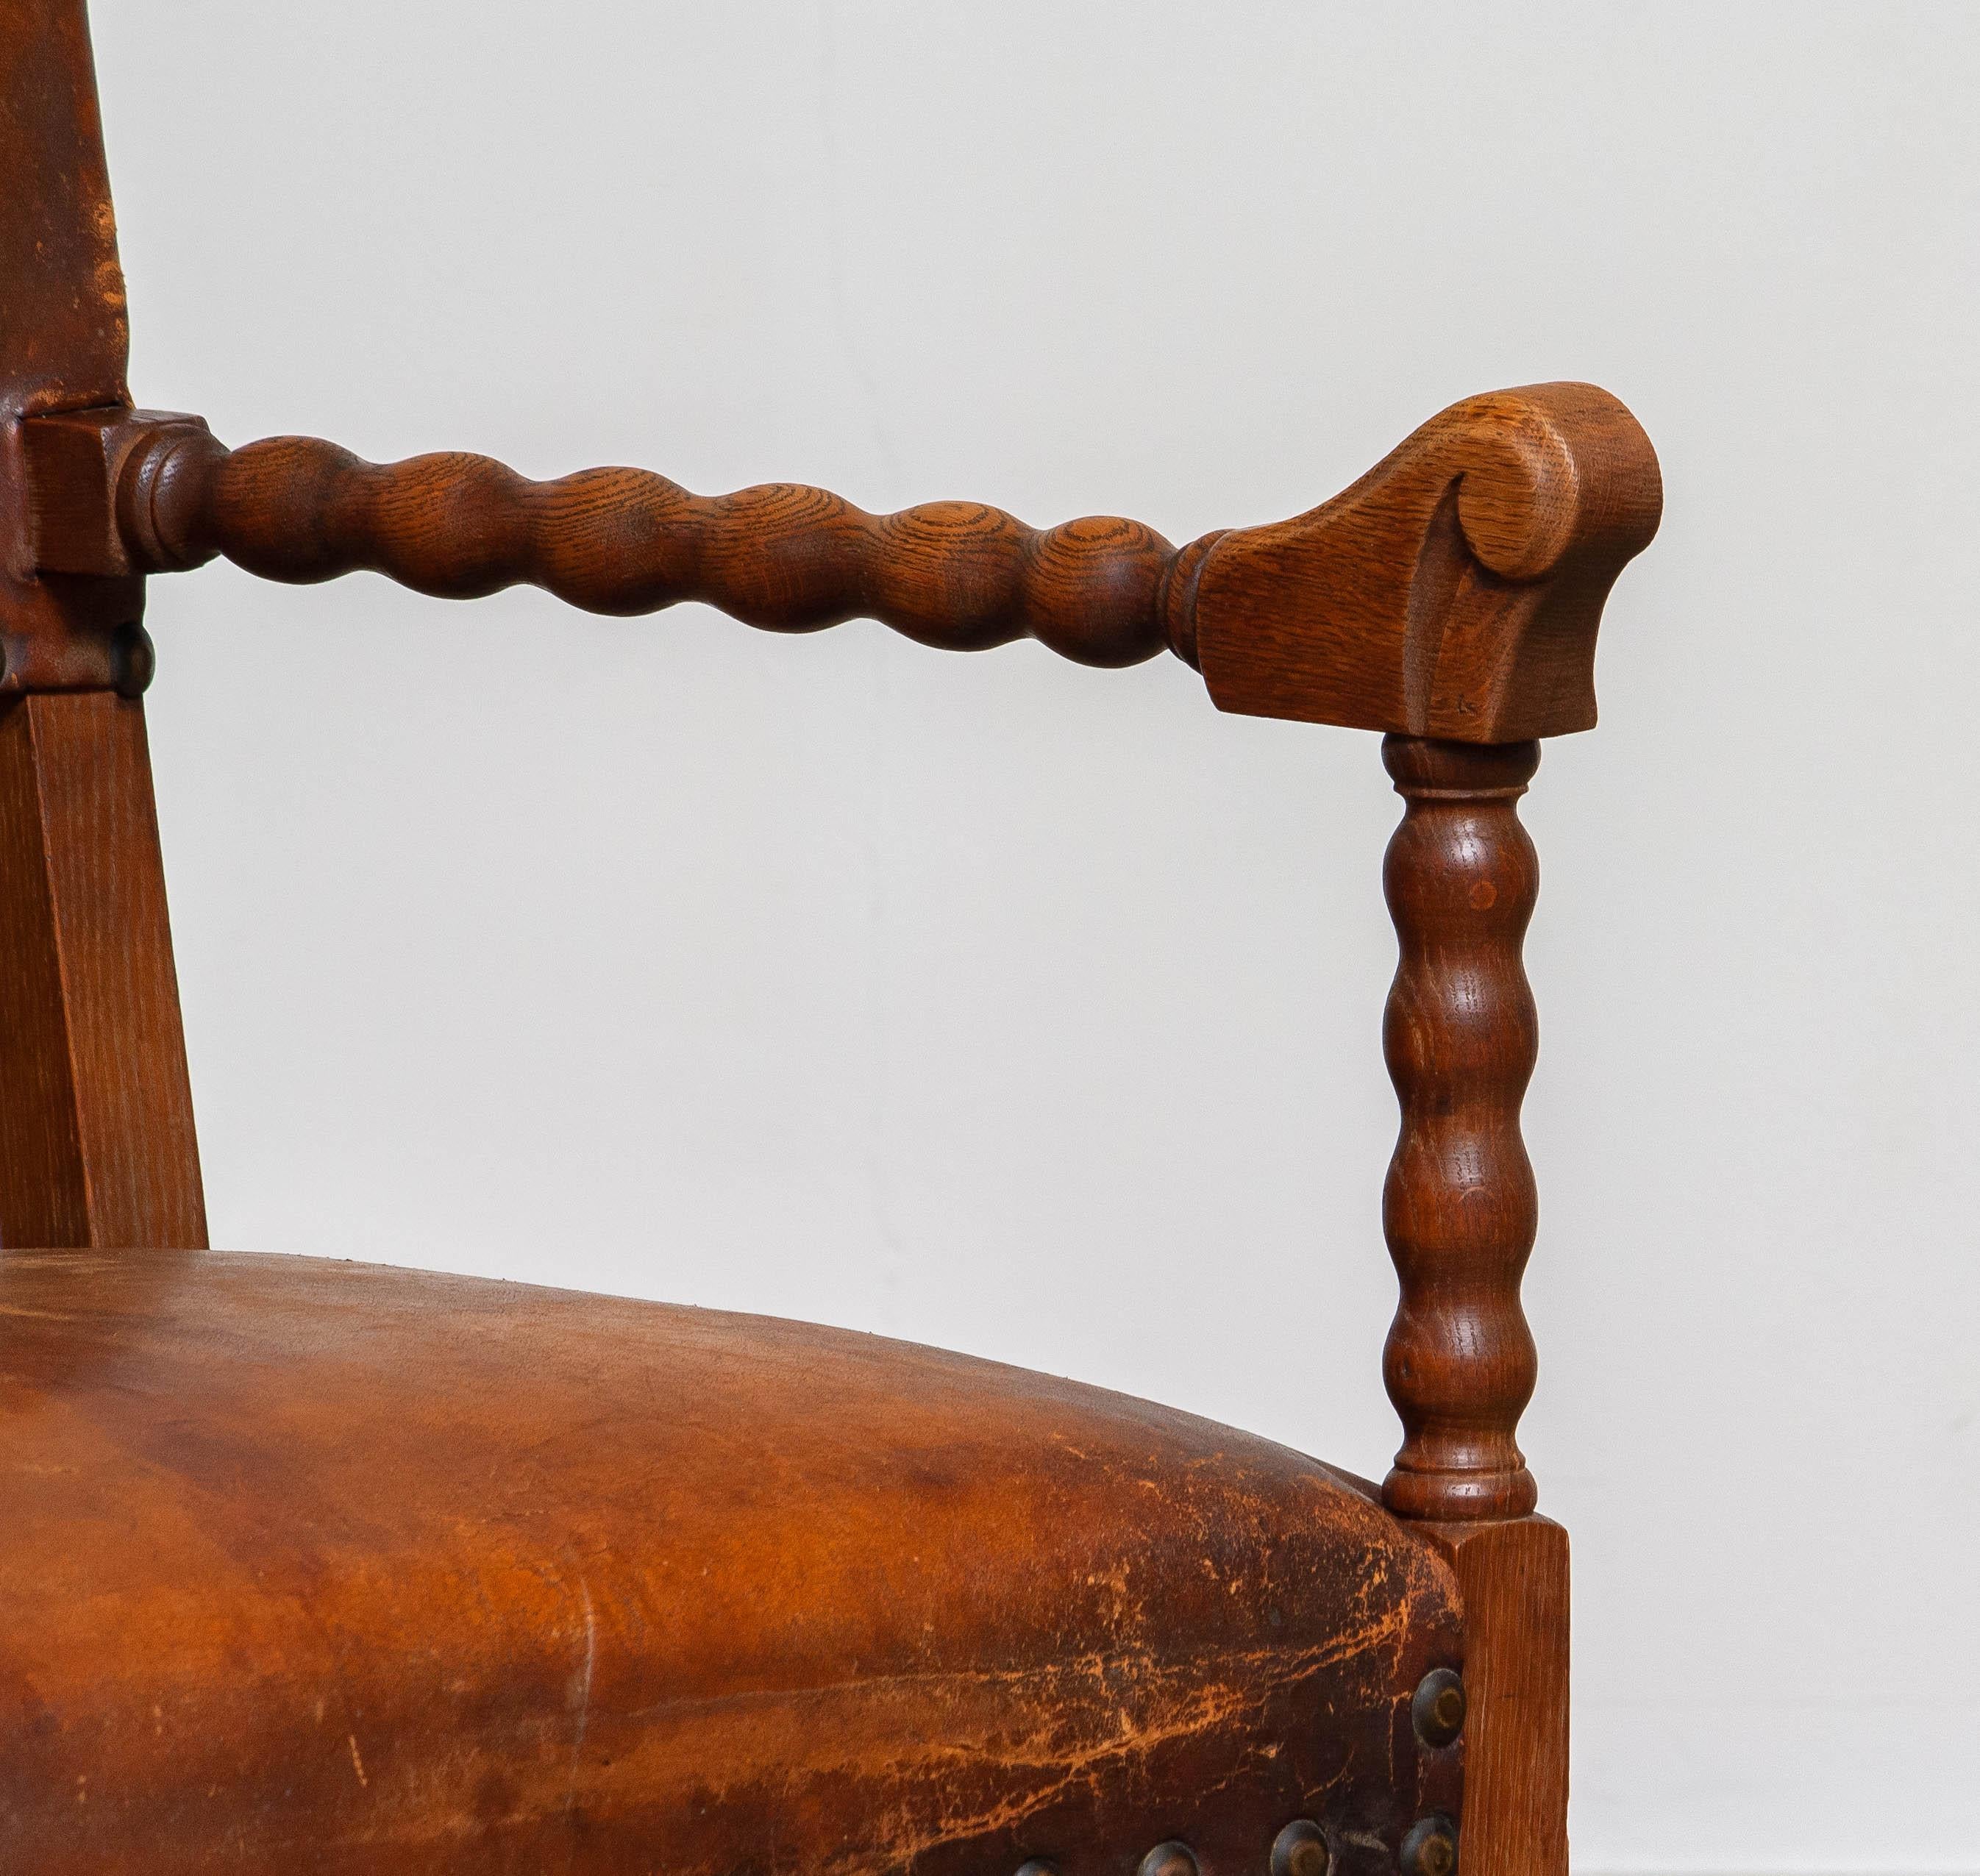 Beautiful 18th century 'Renaissance' oak armchair with spool and craftsmanship details upholstered with leather. The leather is still in good condition and is nailed to the chair with big brass nails.
Overall in very good condition.

Please